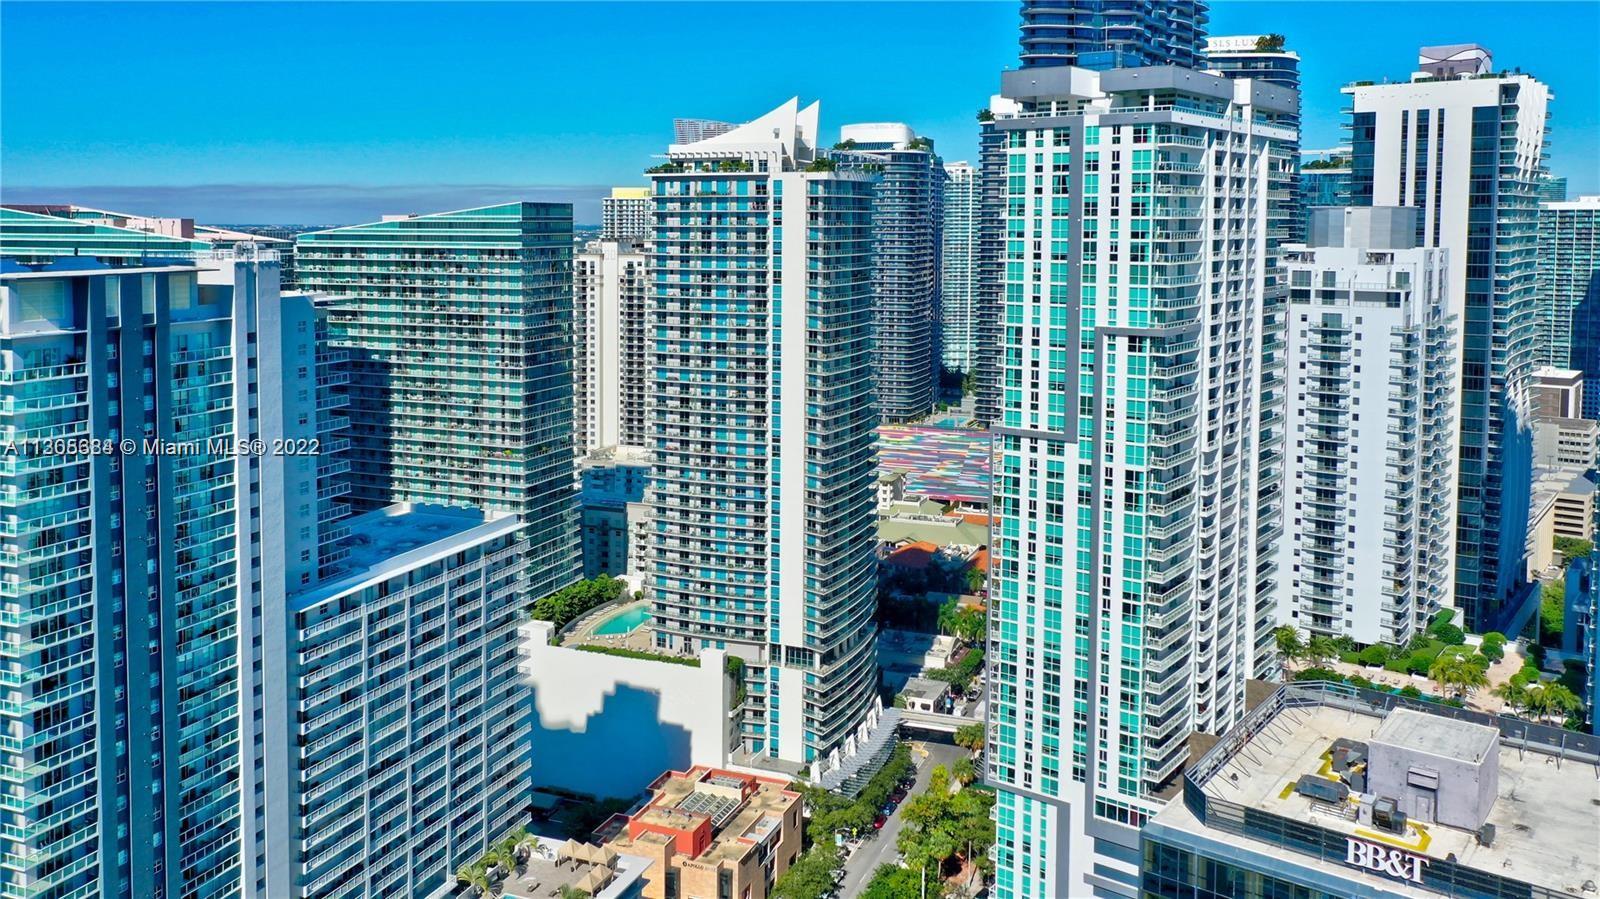 This is a beautiful and the largest One bedroom plus Den unit with a great view to the Bay and city and a lot of
natural light. Located in heart of Mary Brickell Village, great restaurants, boutiques and next to the metro mover.
In the 9th floor you can find the pool, sauna, gym, club room, cinema and kids room. In the 43rd floor there is a
game room, and a roof tub pool.
GORGEOUS BUILDING IN THE HEART OF BRICKELL. THIS IS THE LARGEST 1 BEDROOM+ DEN, 1 BATH UNIT IN THE BLDG. UNIT HAS A GOURMET KITCHEN THAT INCLUDES ITALIAN CABINETRY, STONE COUNTERTOPS, & PREMIUM APPLIANCES. MODERN BATHROOM WITH TUB AND PORCELAIN TILE FLOORING. LAUNDRY CLOSET WITH WASHER/DRYER IN THE UNIT. AMENITIES INCLUDE ROOFTOP POOL, FITNESS CENTER, MOVIE THEATER, KID'S PLAYROOM, VALET PARKING AND MUCH MORE.